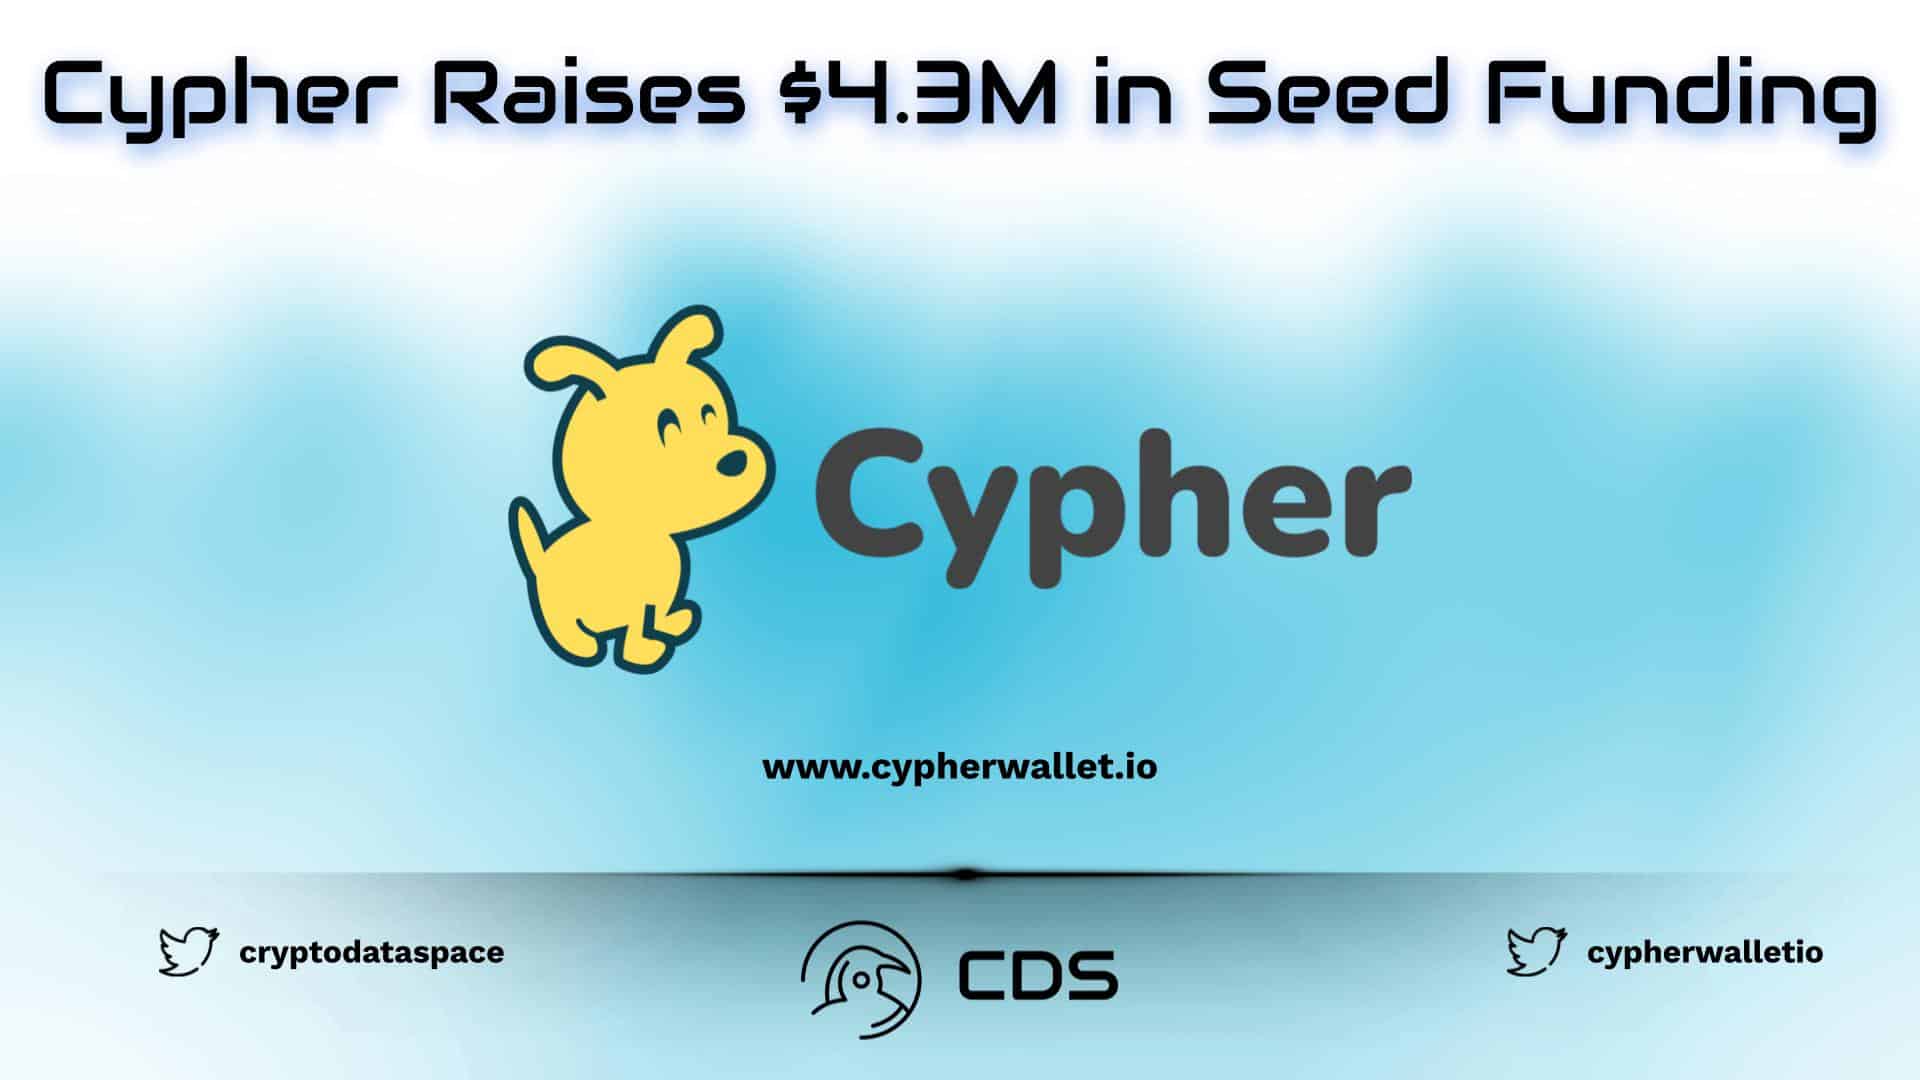 Cypher Raises $4.3M in Seed Funding